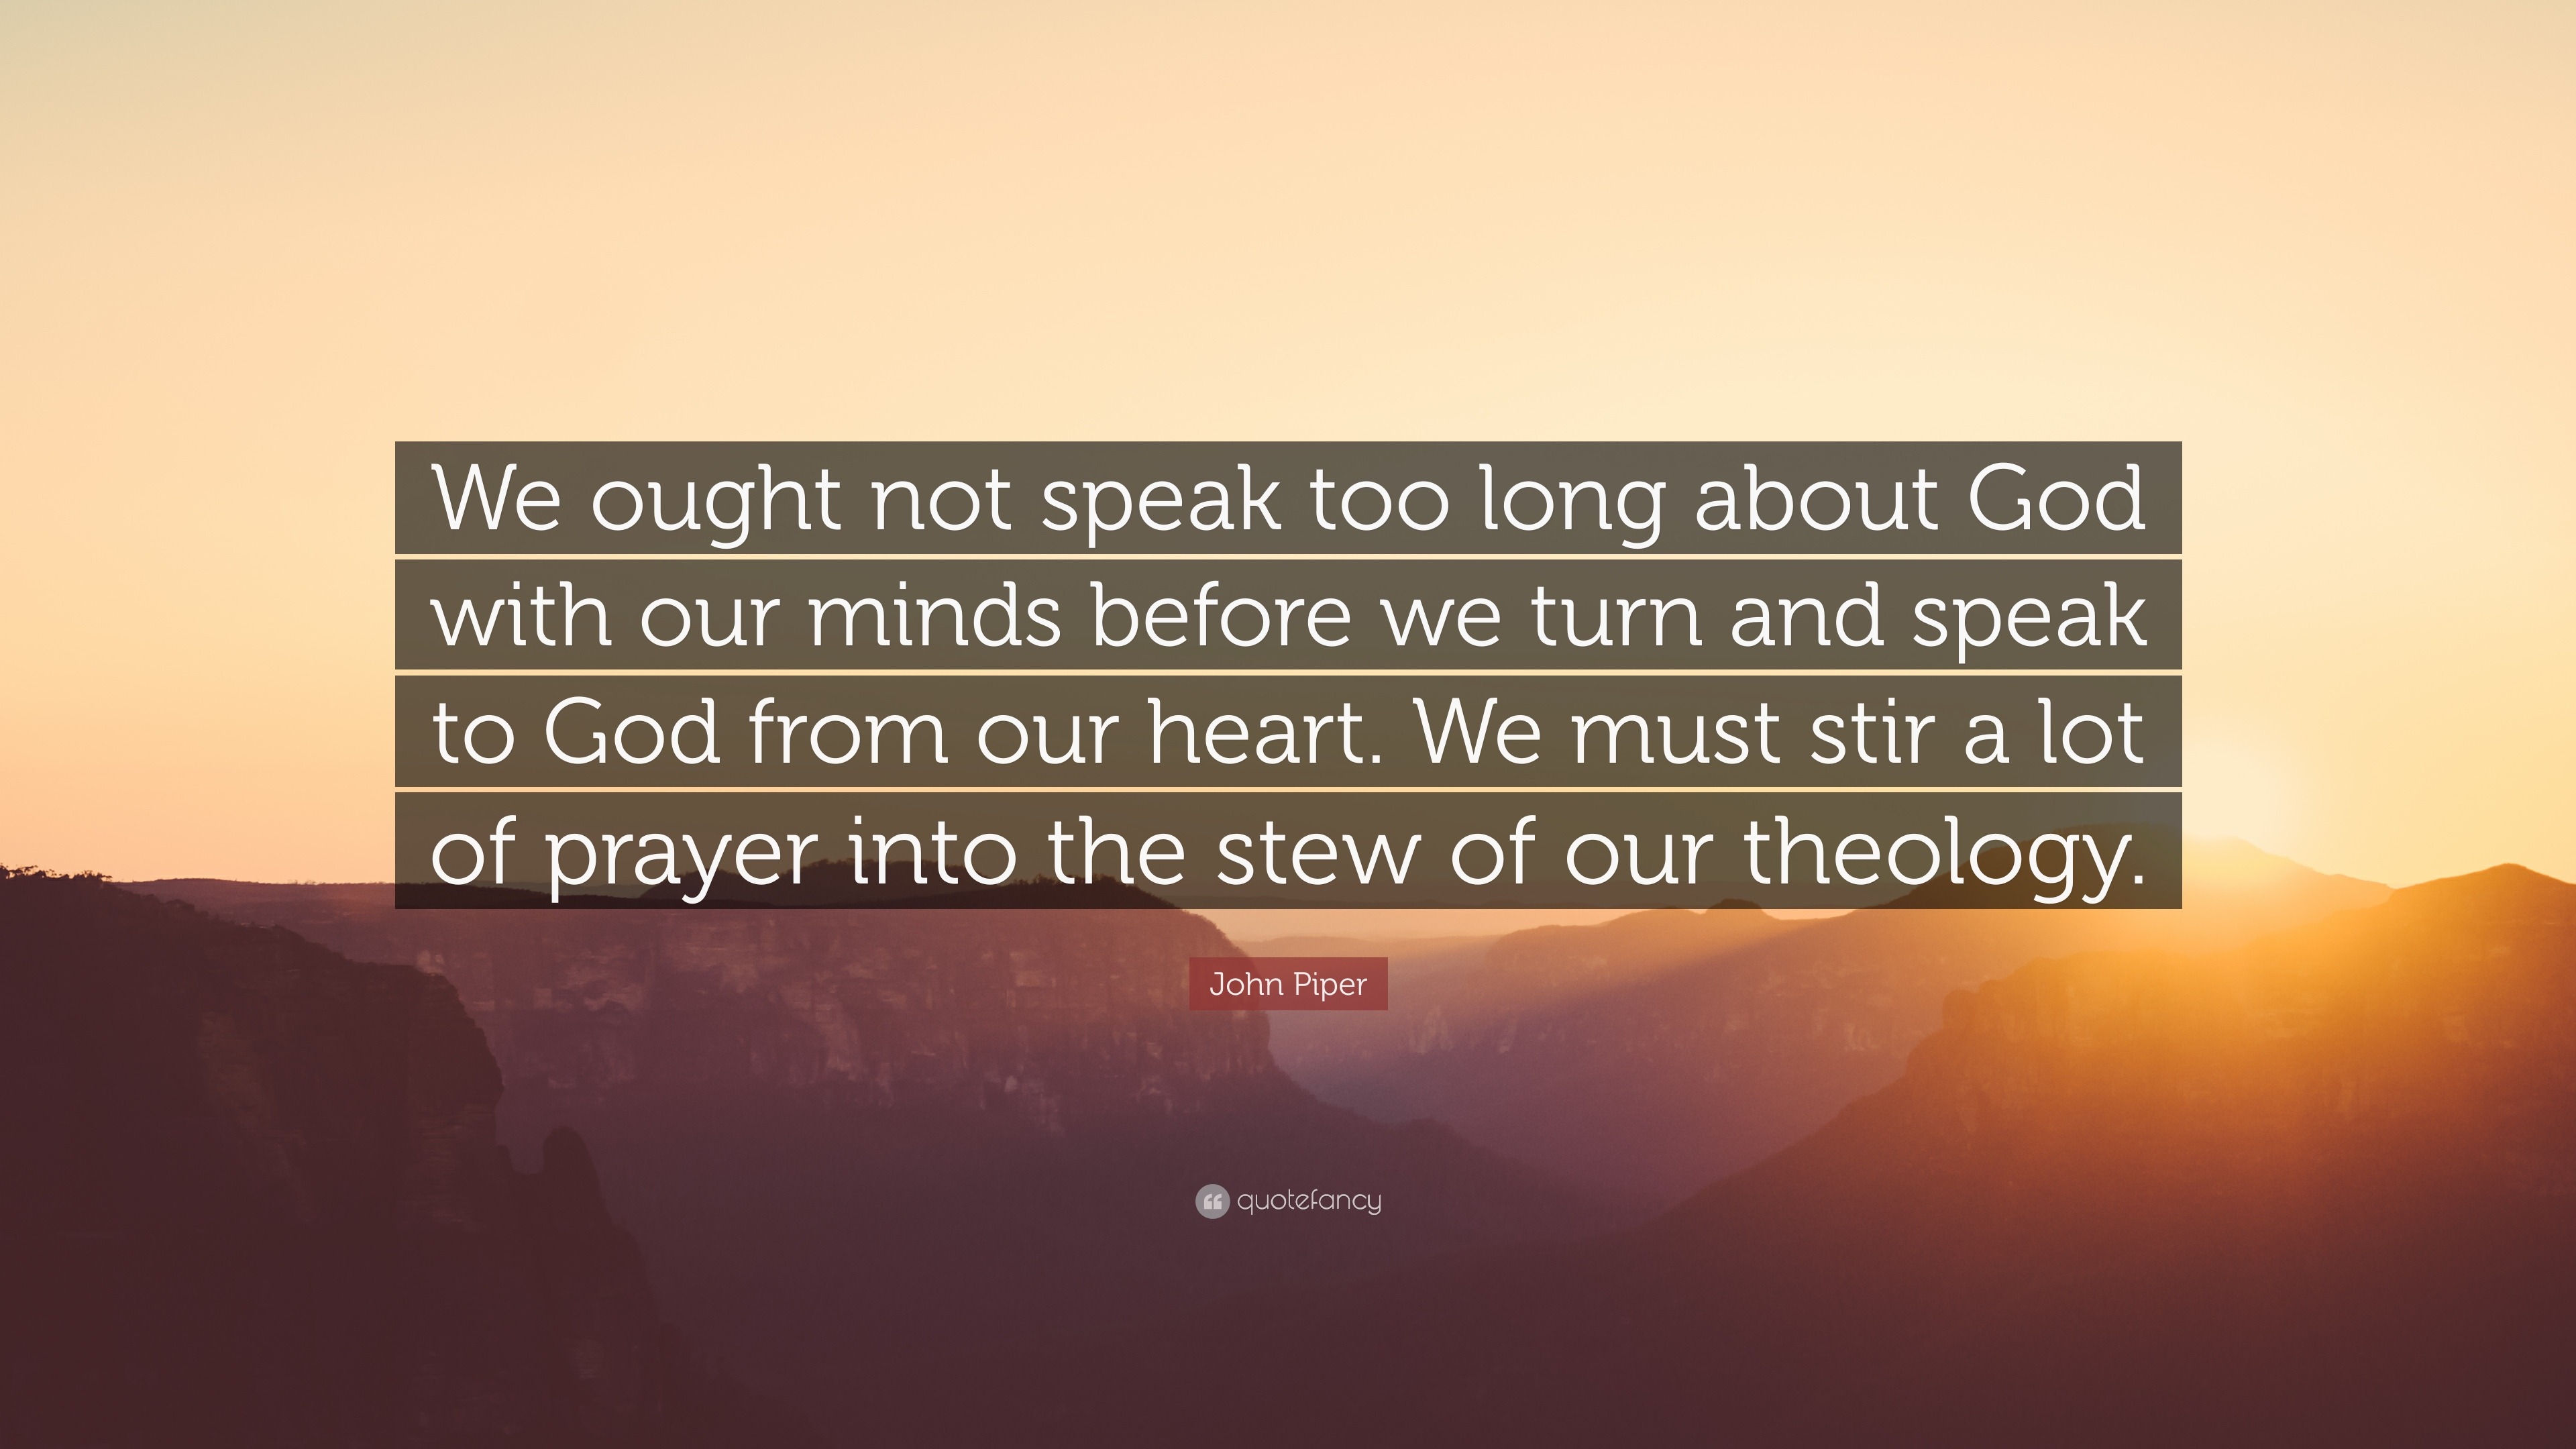 227412 John Piper Quote We ought not speak too long about God with our